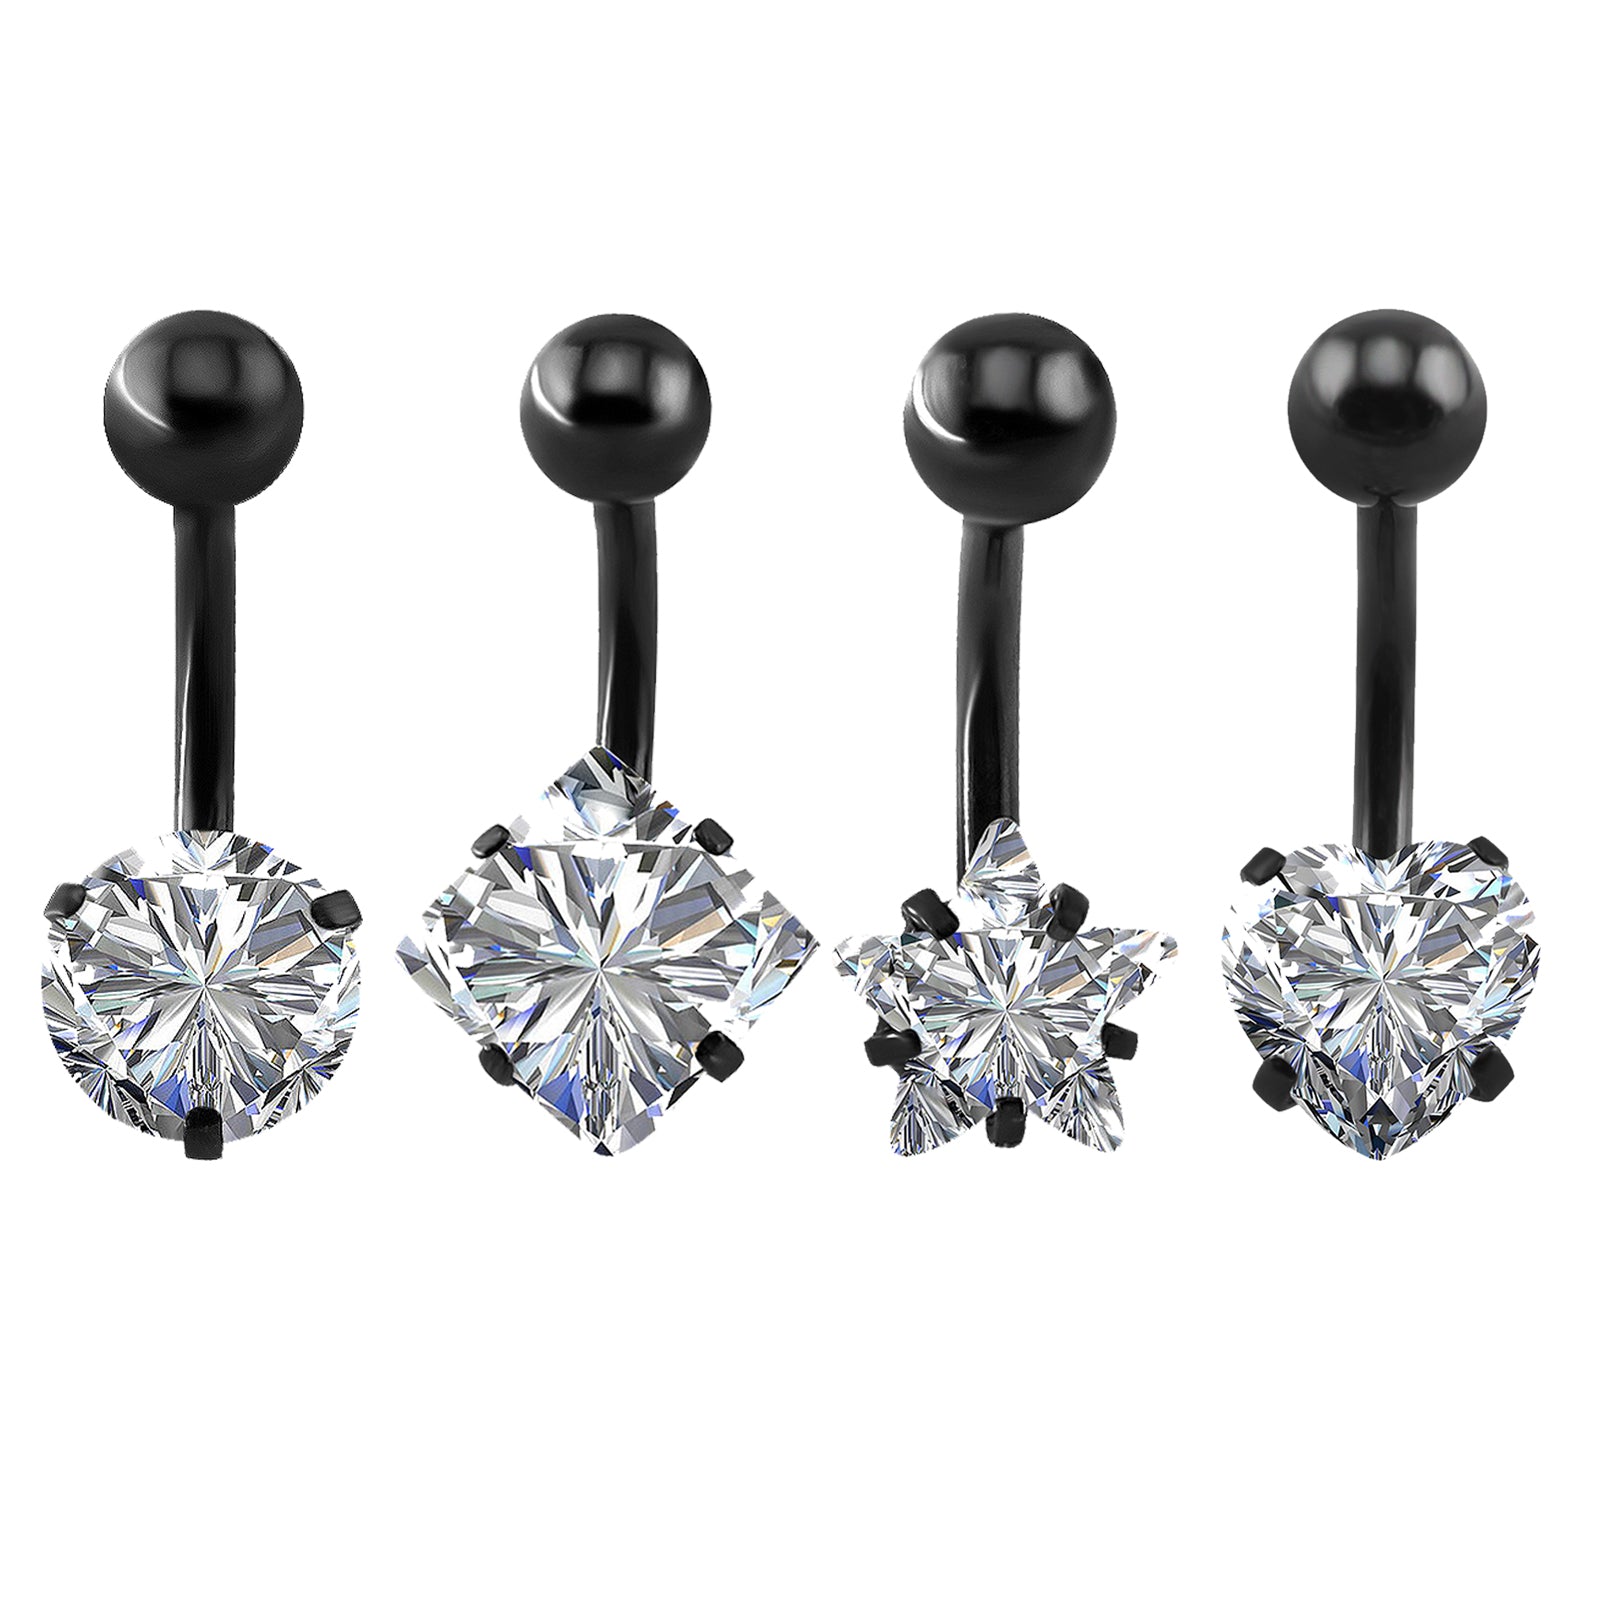 14g-Black-Heart-Stars-Shape-Belly-Button-Rings-Stainless-Steel-Cubic-Zirconia-Navel-Piercing-Jewelry